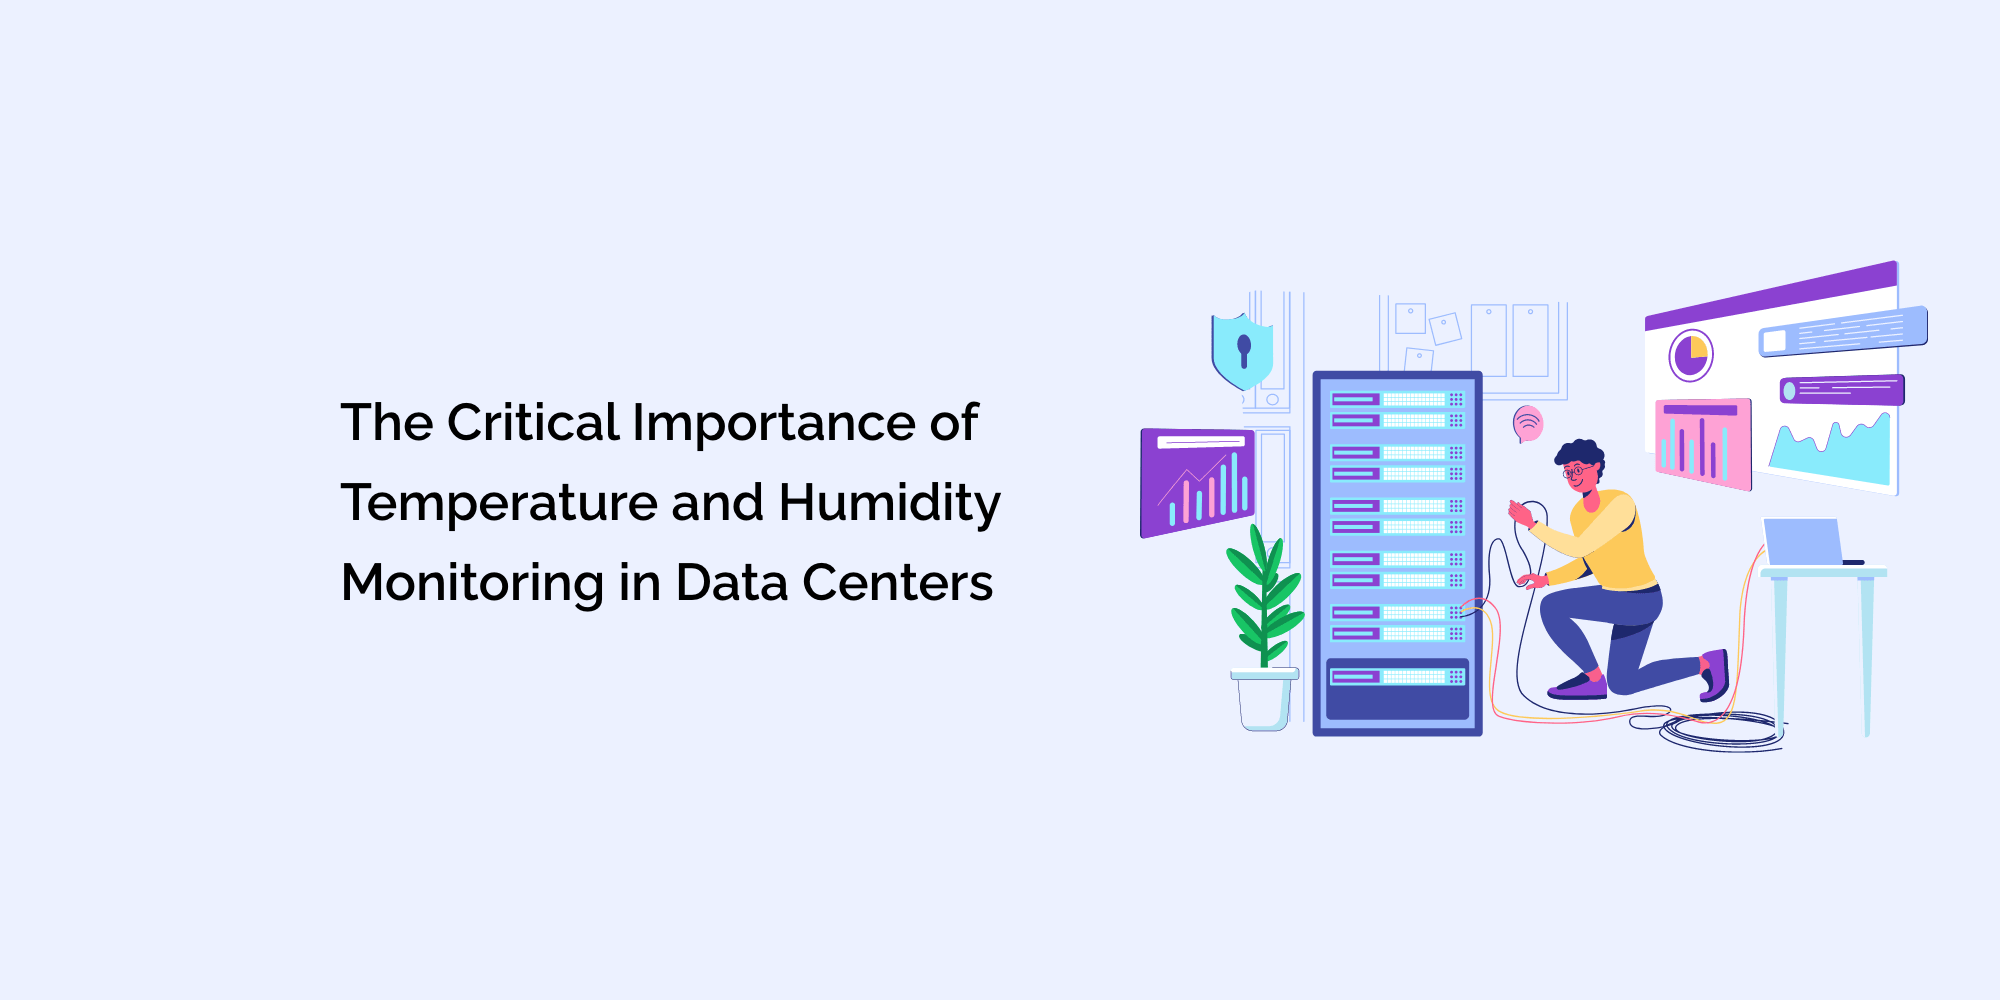 The Critical Importance of Temperature and Humidity Monitoring in Data Centers